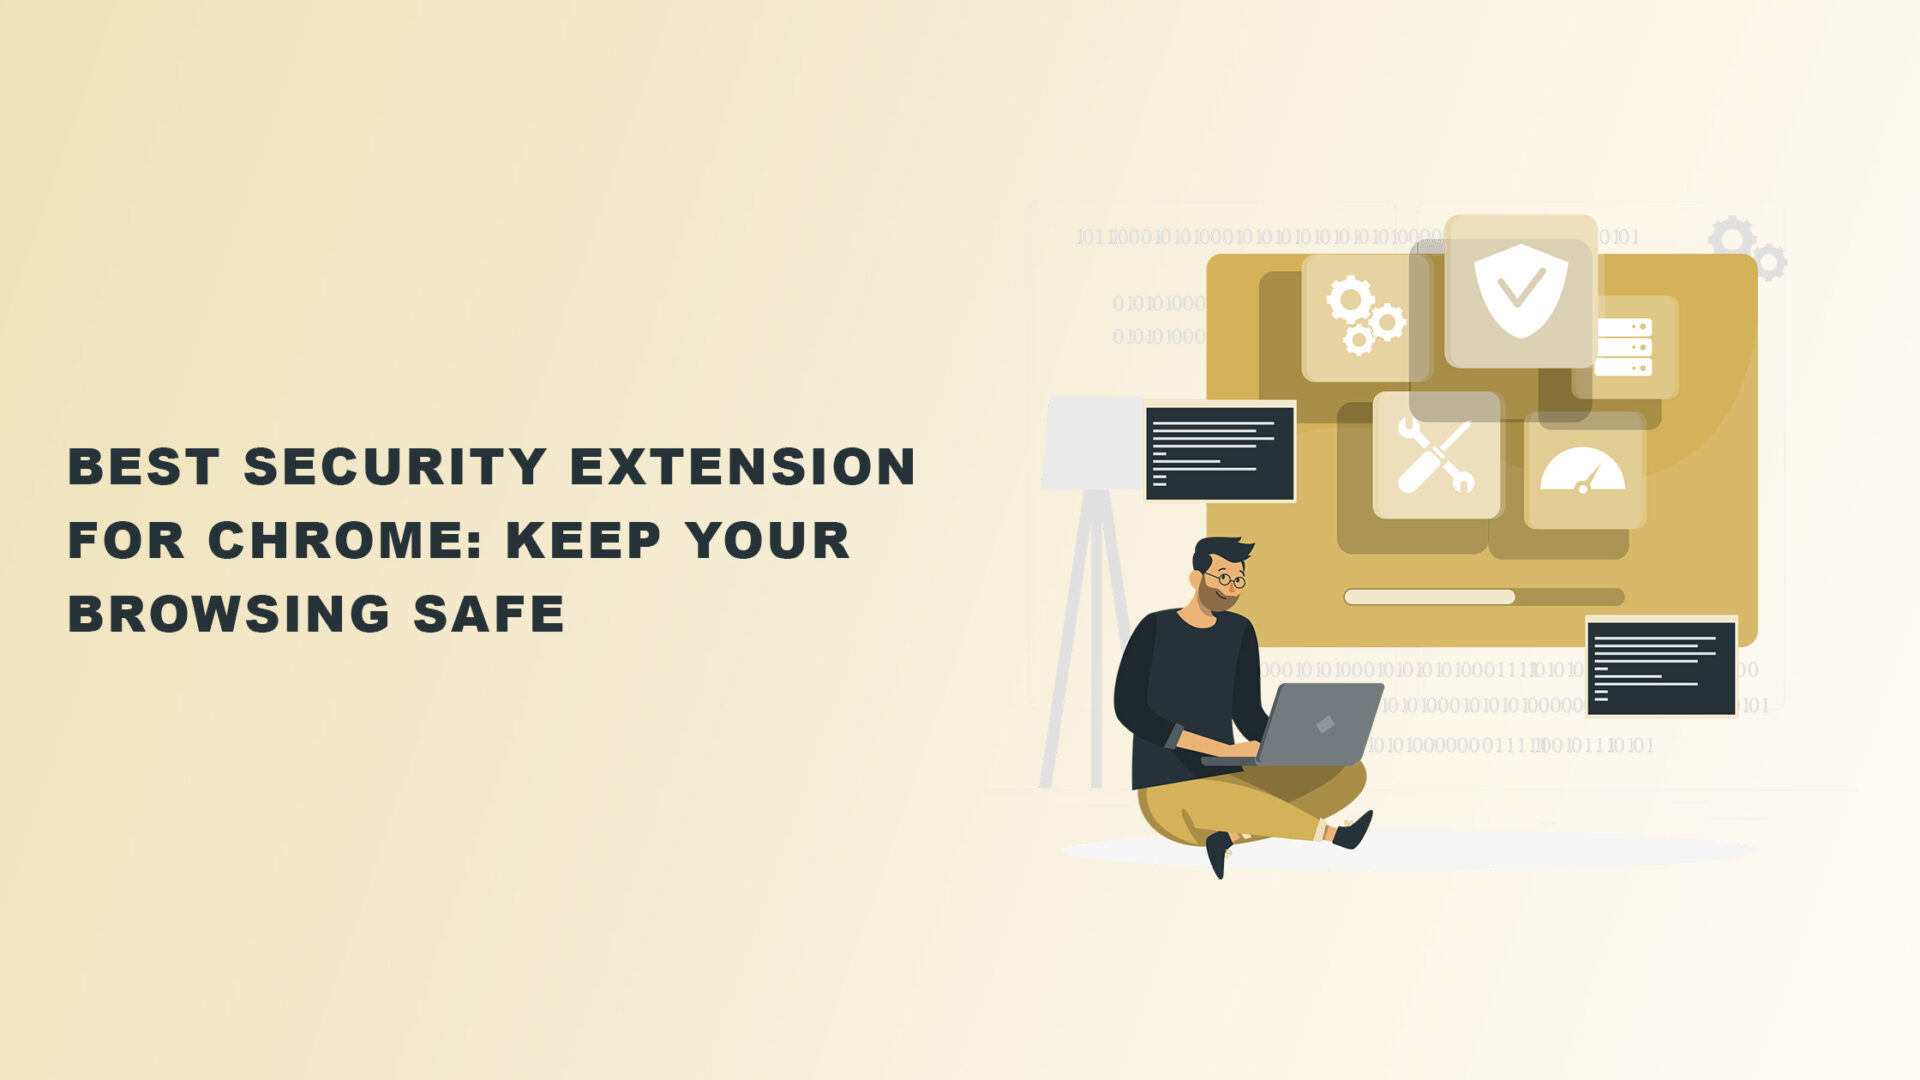 Best security extension for chrome- Keep your browsing safe